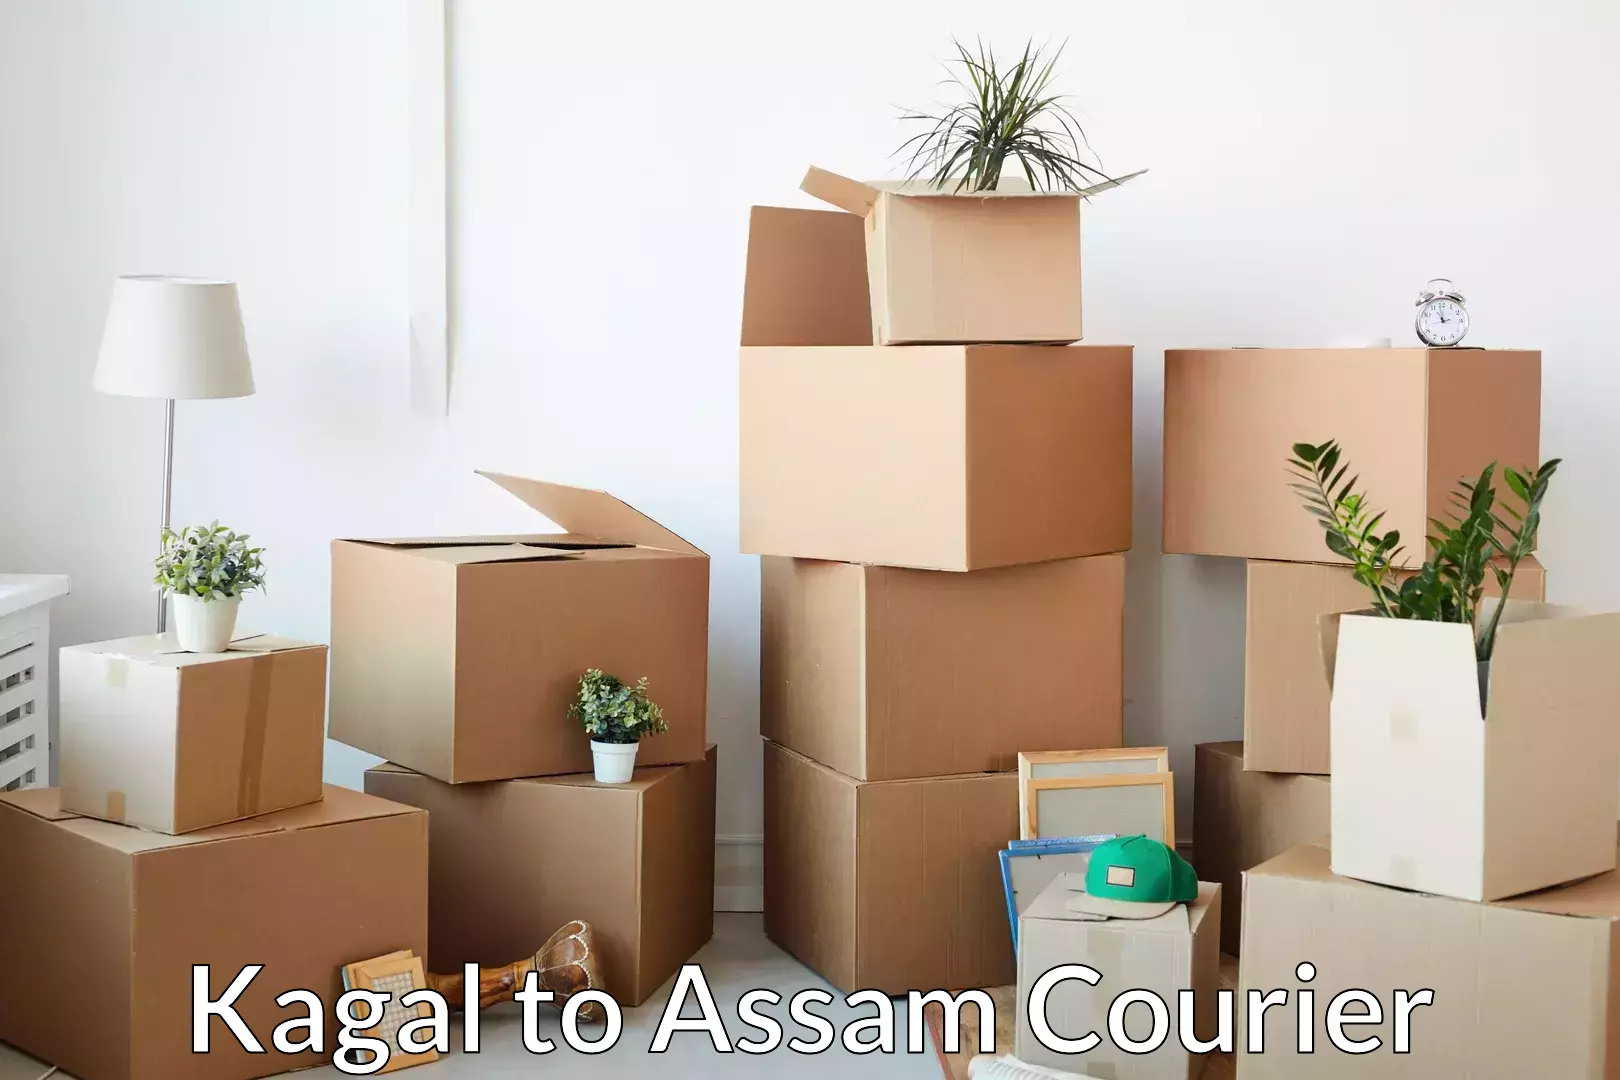 Home moving specialists Kagal to Assam